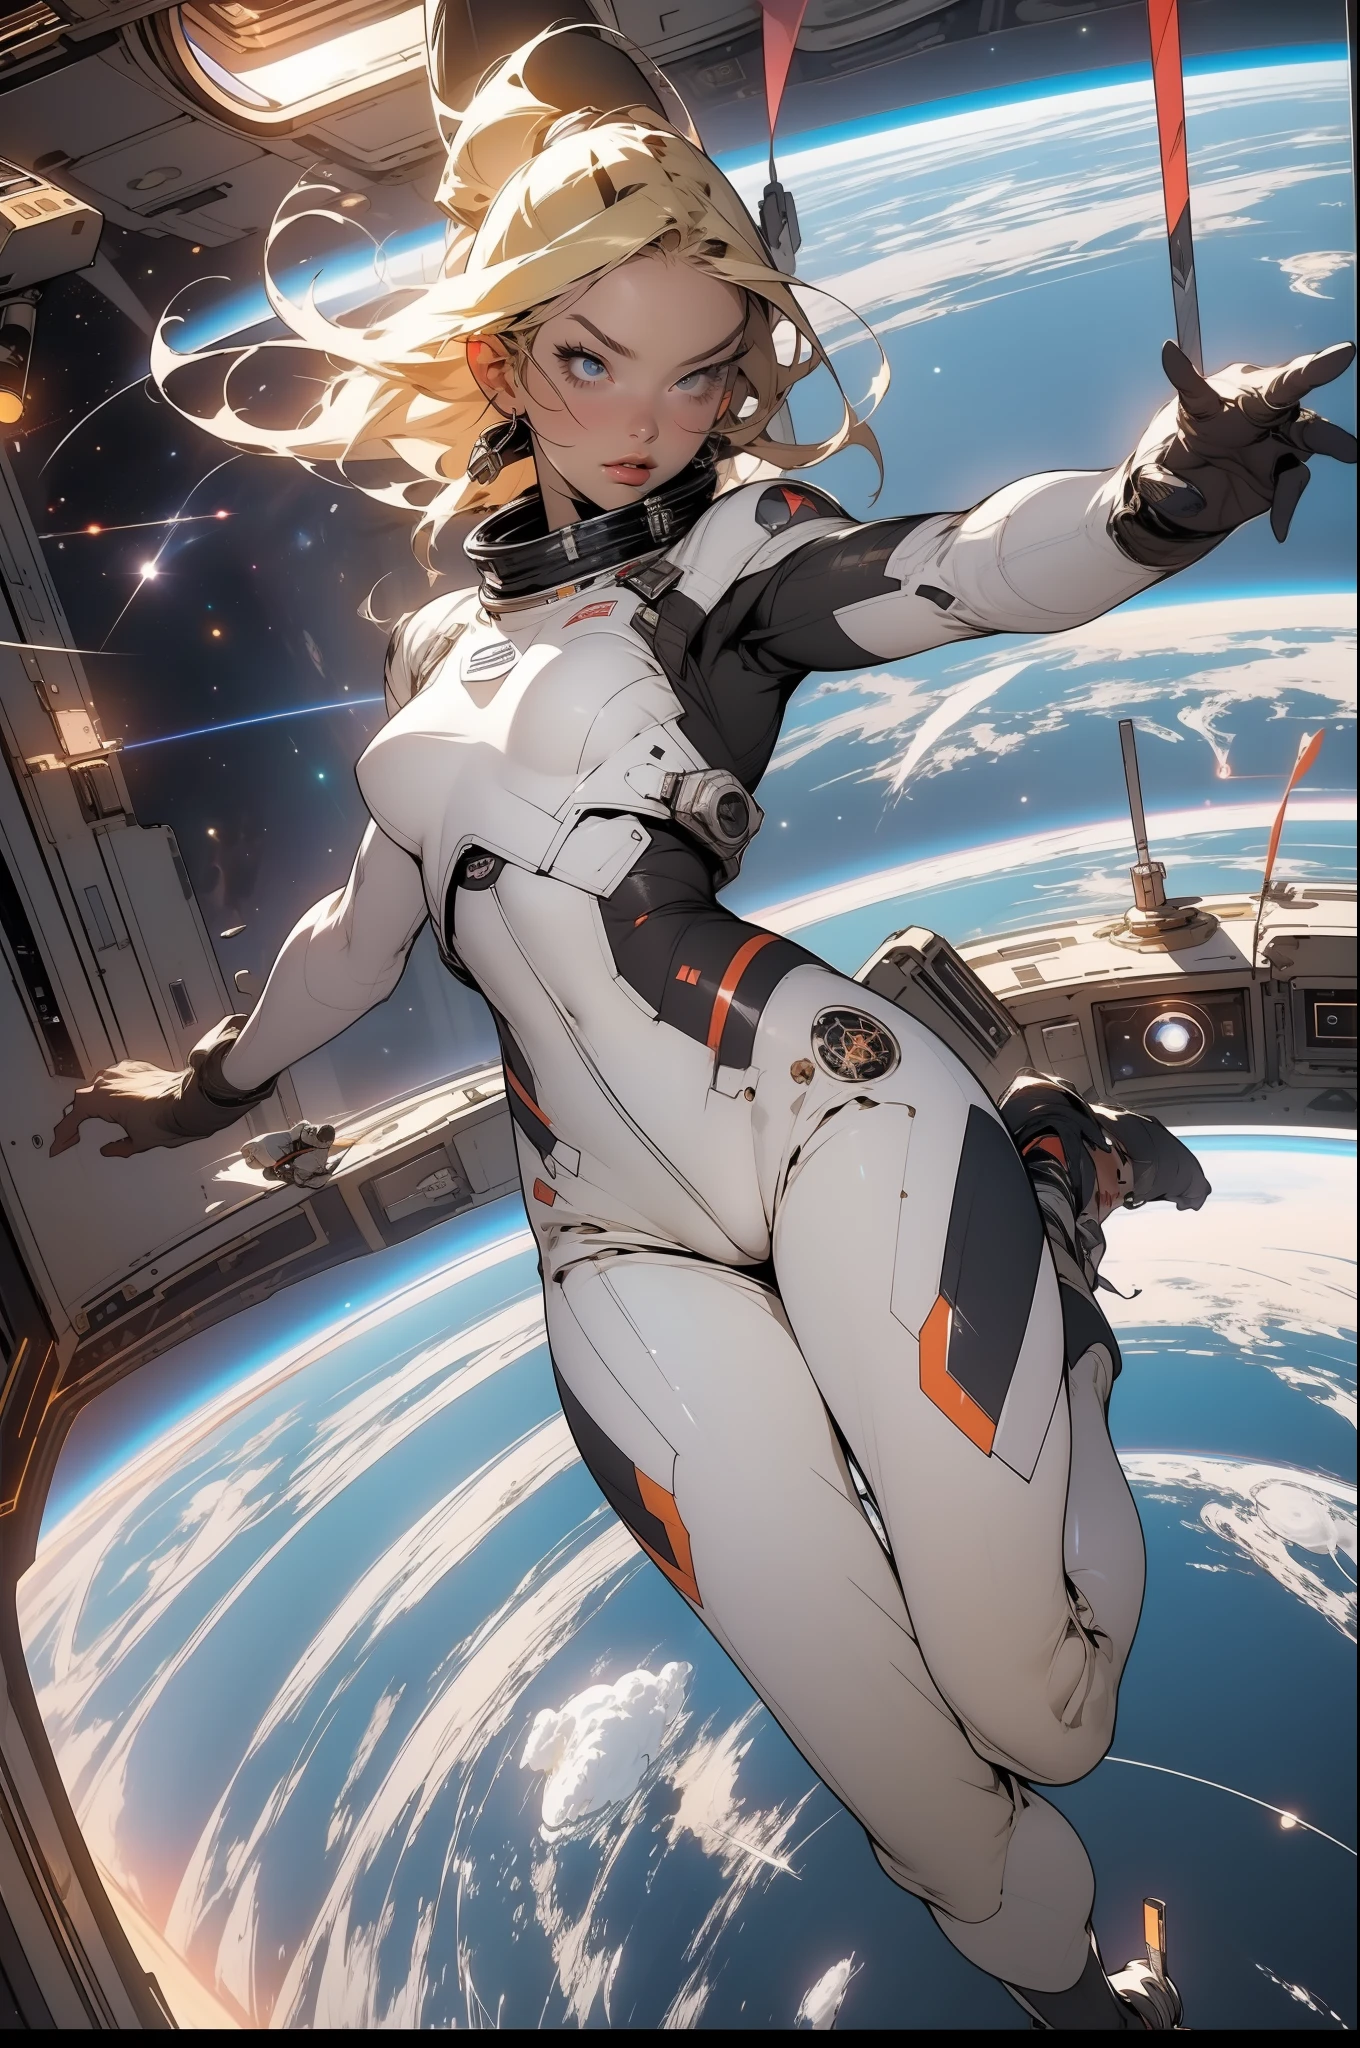 A bombastic blonde with perfect body on a space station floating in space with Earth in the background, Full body in an action pose